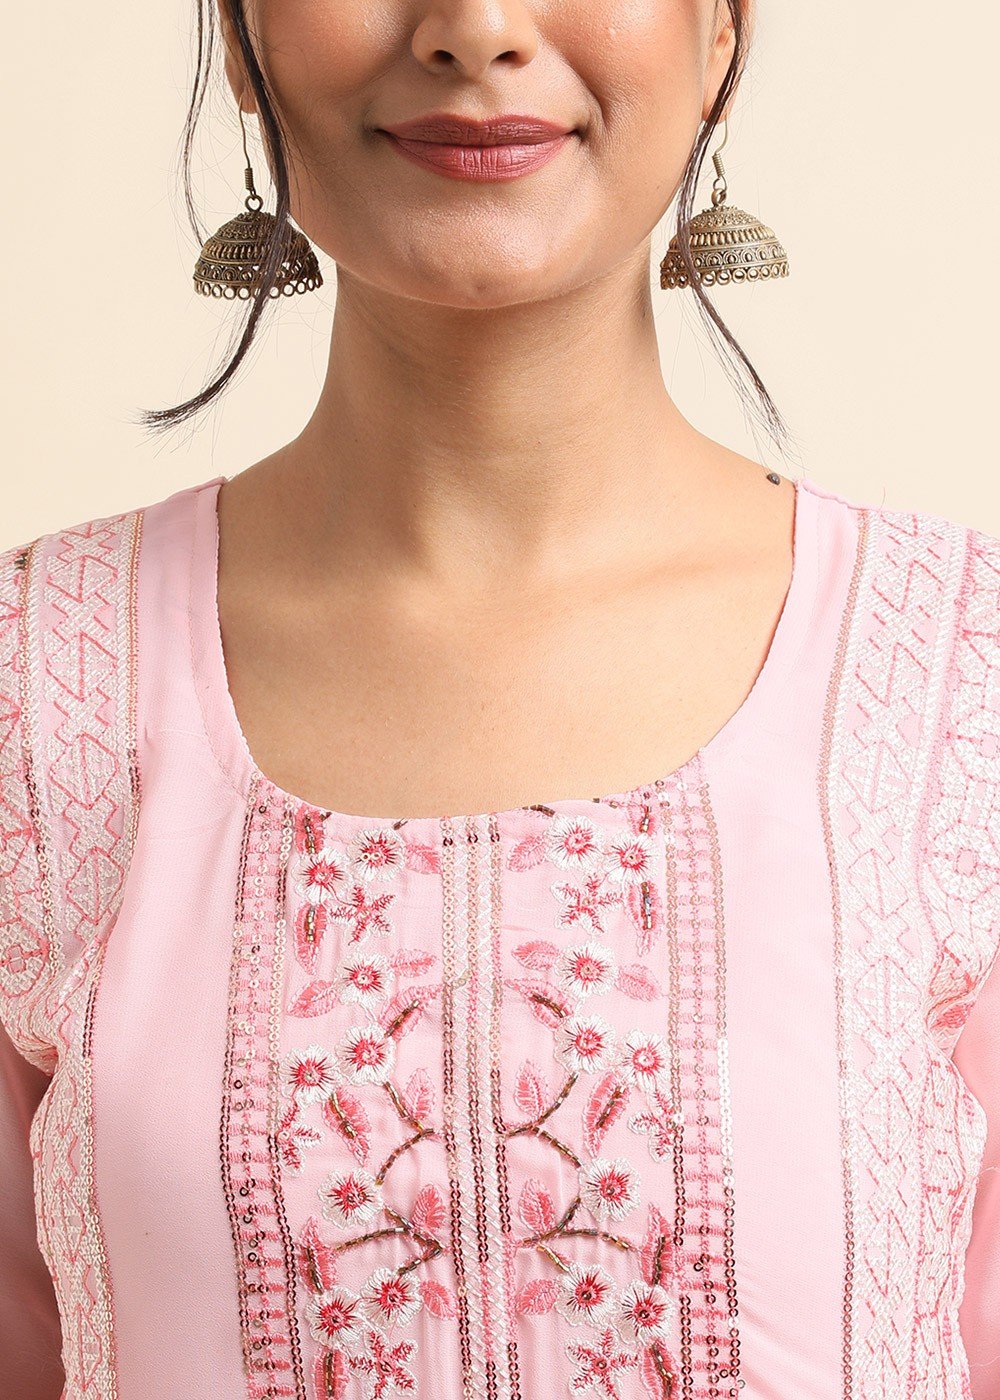 Pink Embroidered Pant Suit Set In Georgette